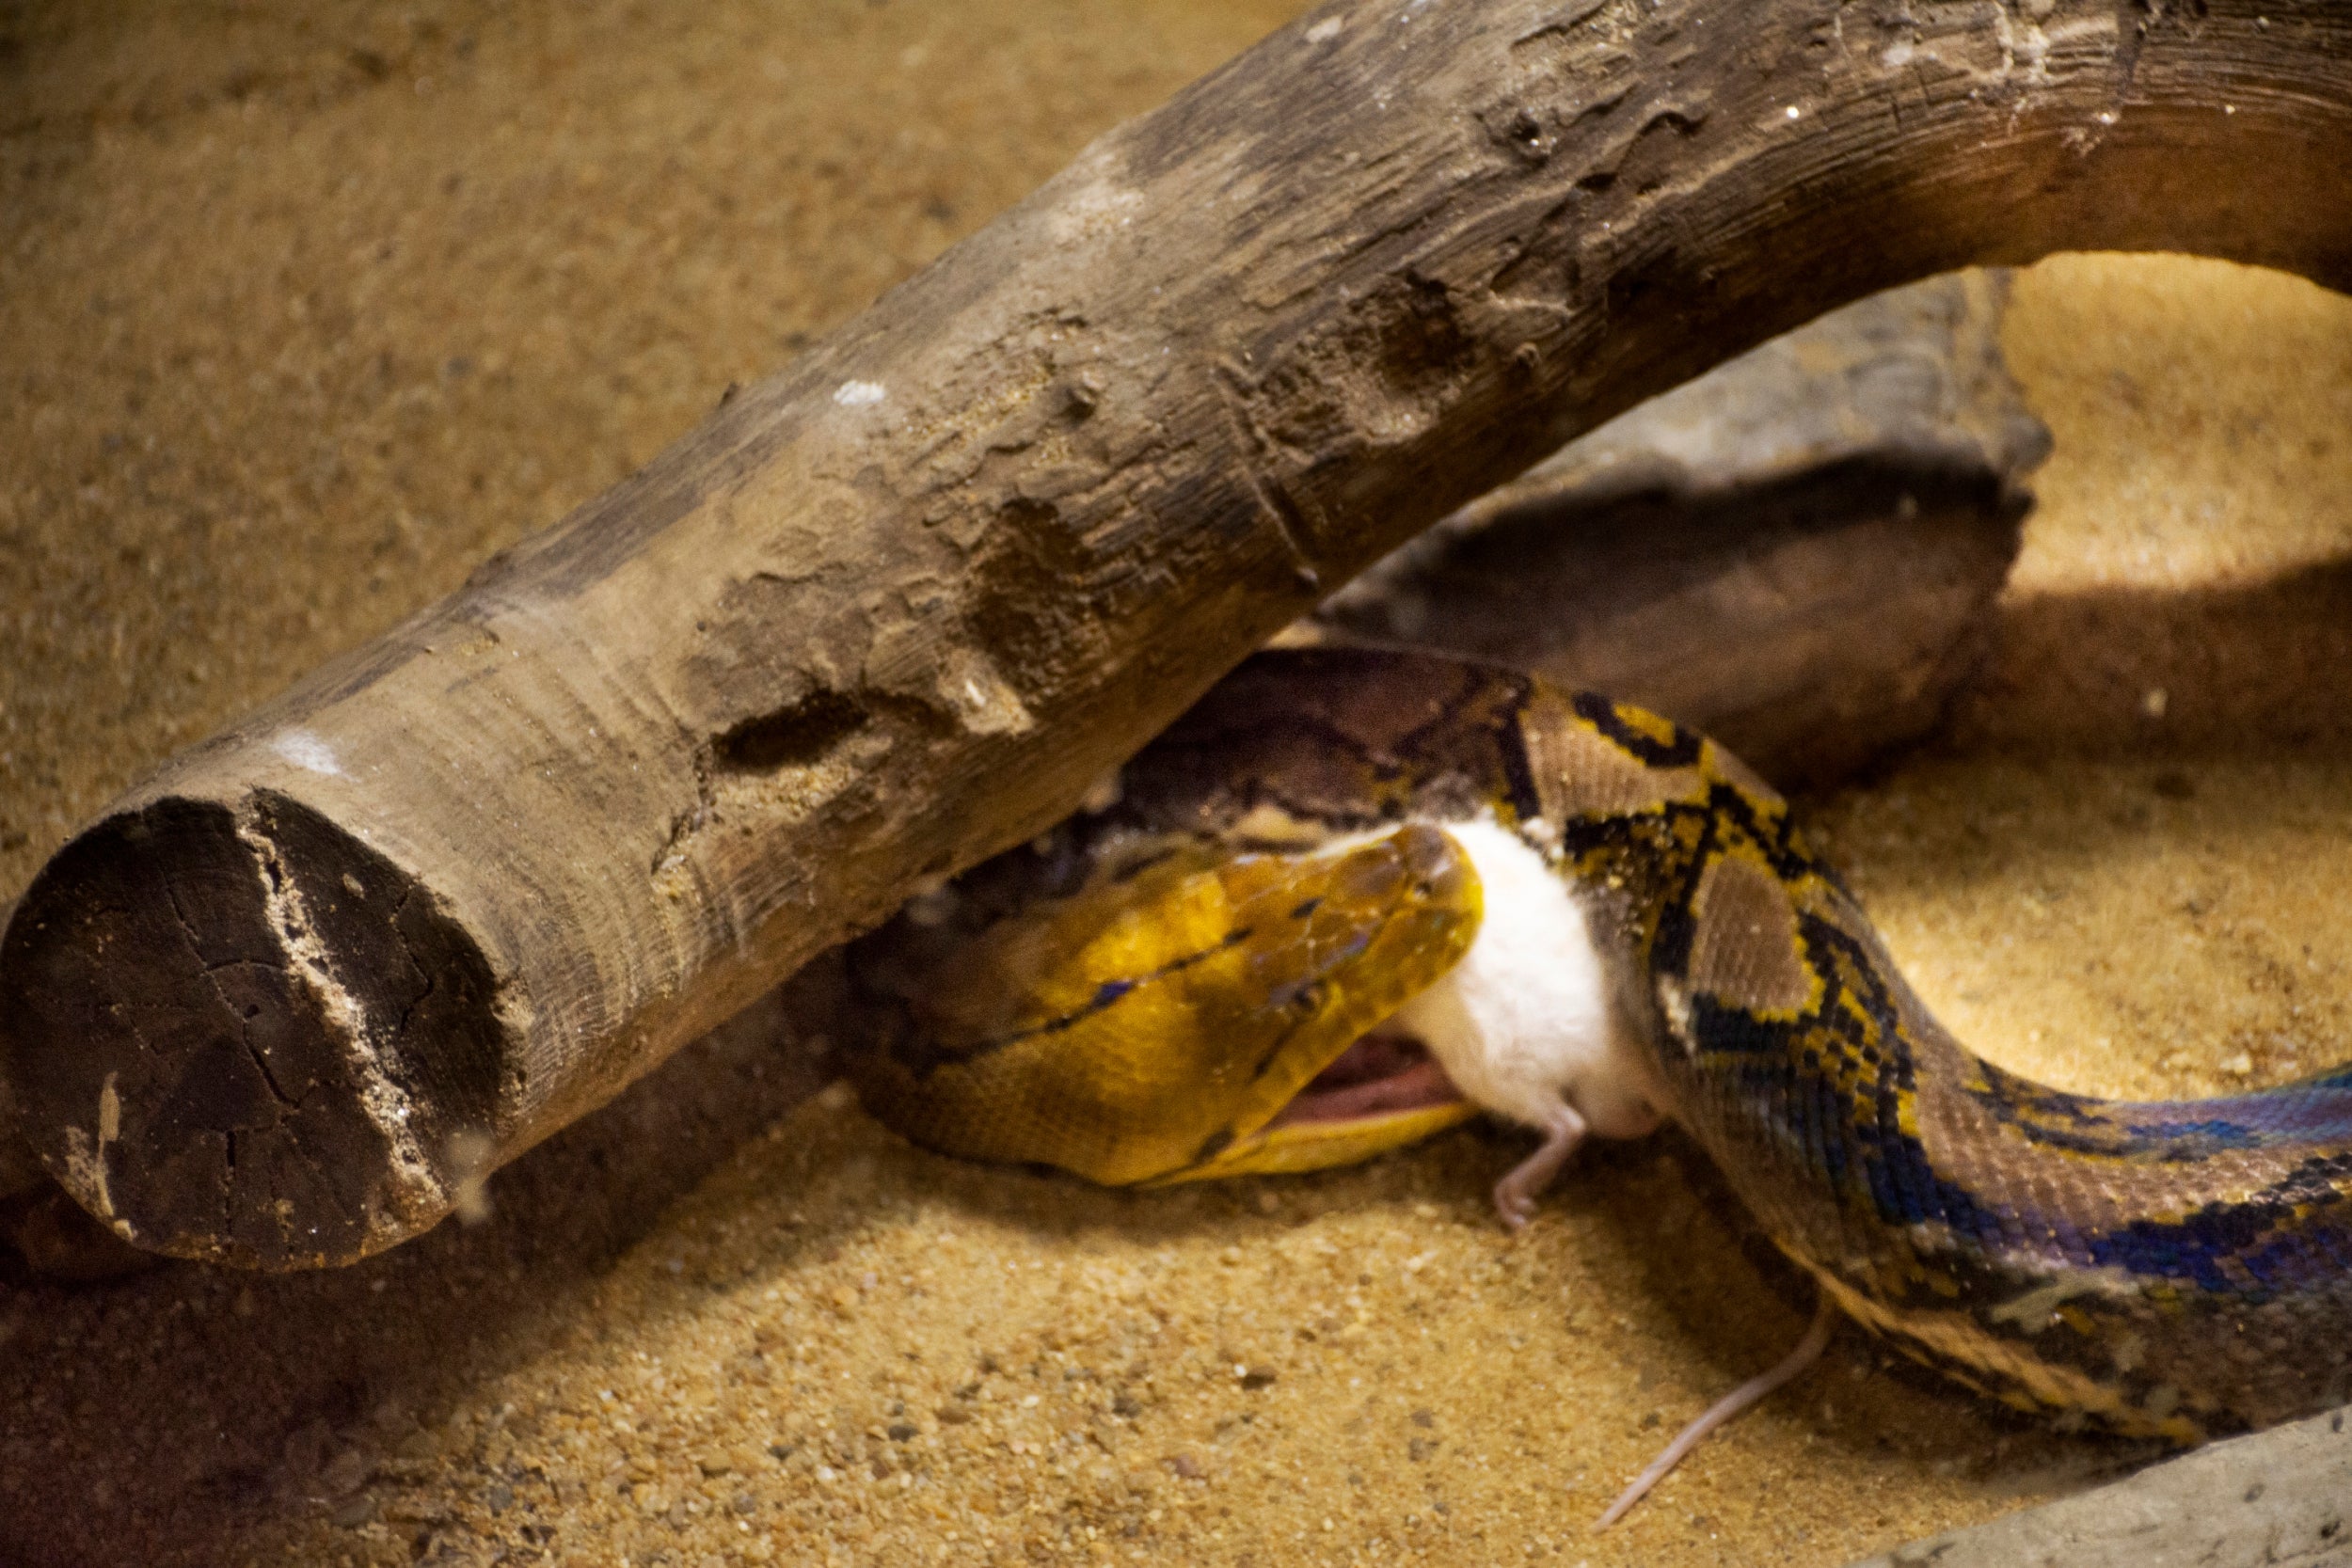 Once all that food is circulating through the snake’s bloodstream, its other organs have to cope with it